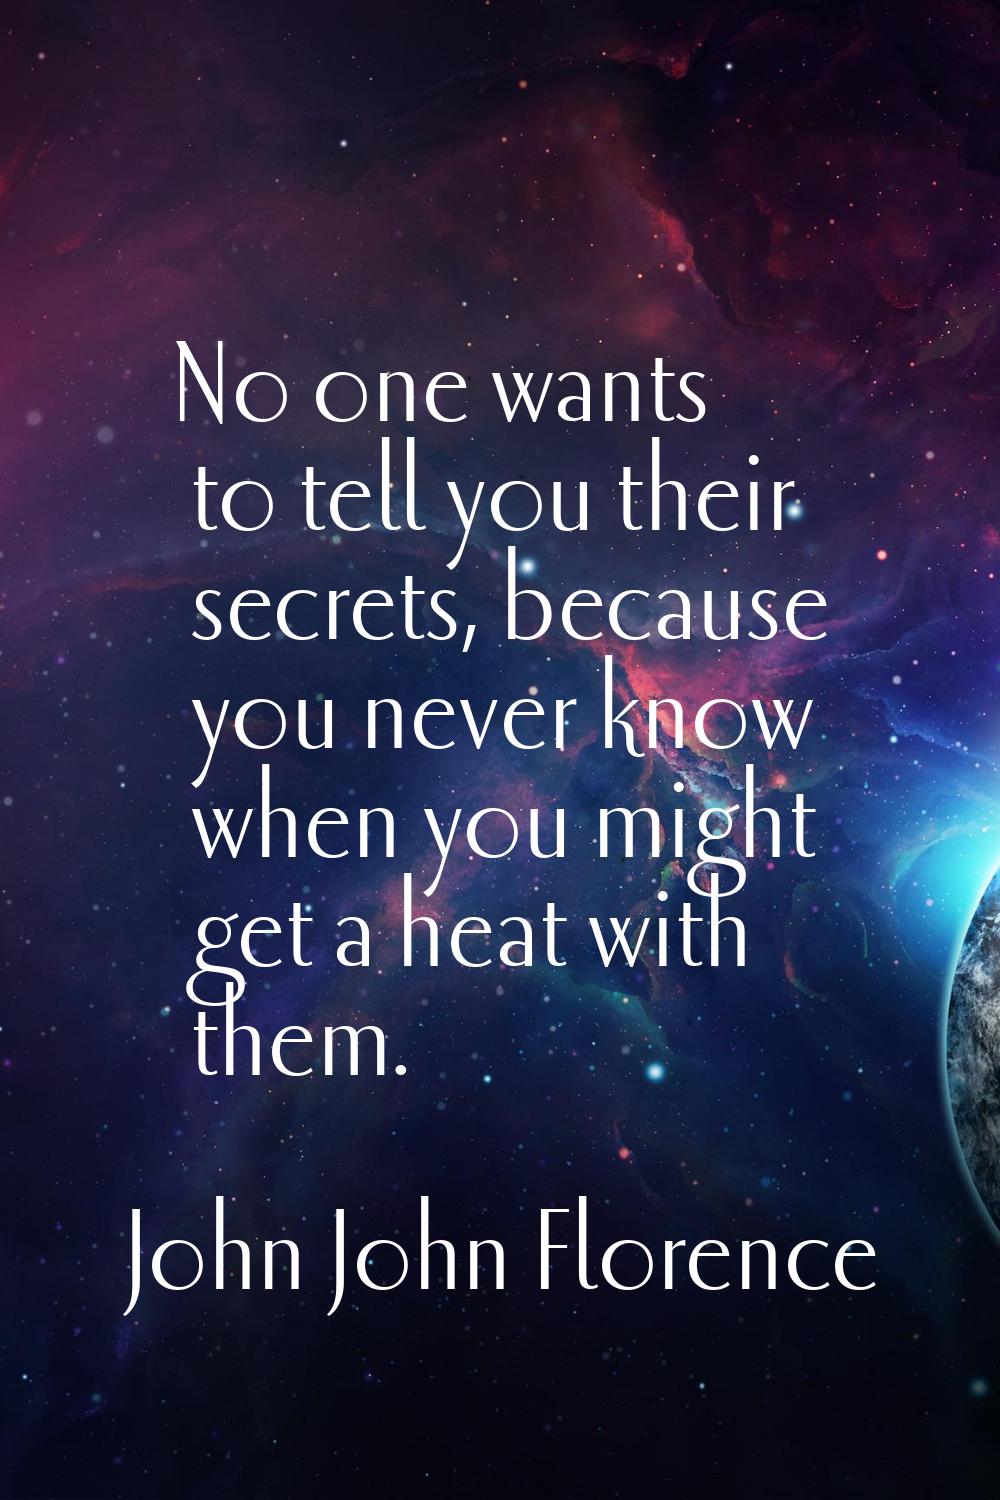 No one wants to tell you their secrets, because you never know when you might get a heat with them.